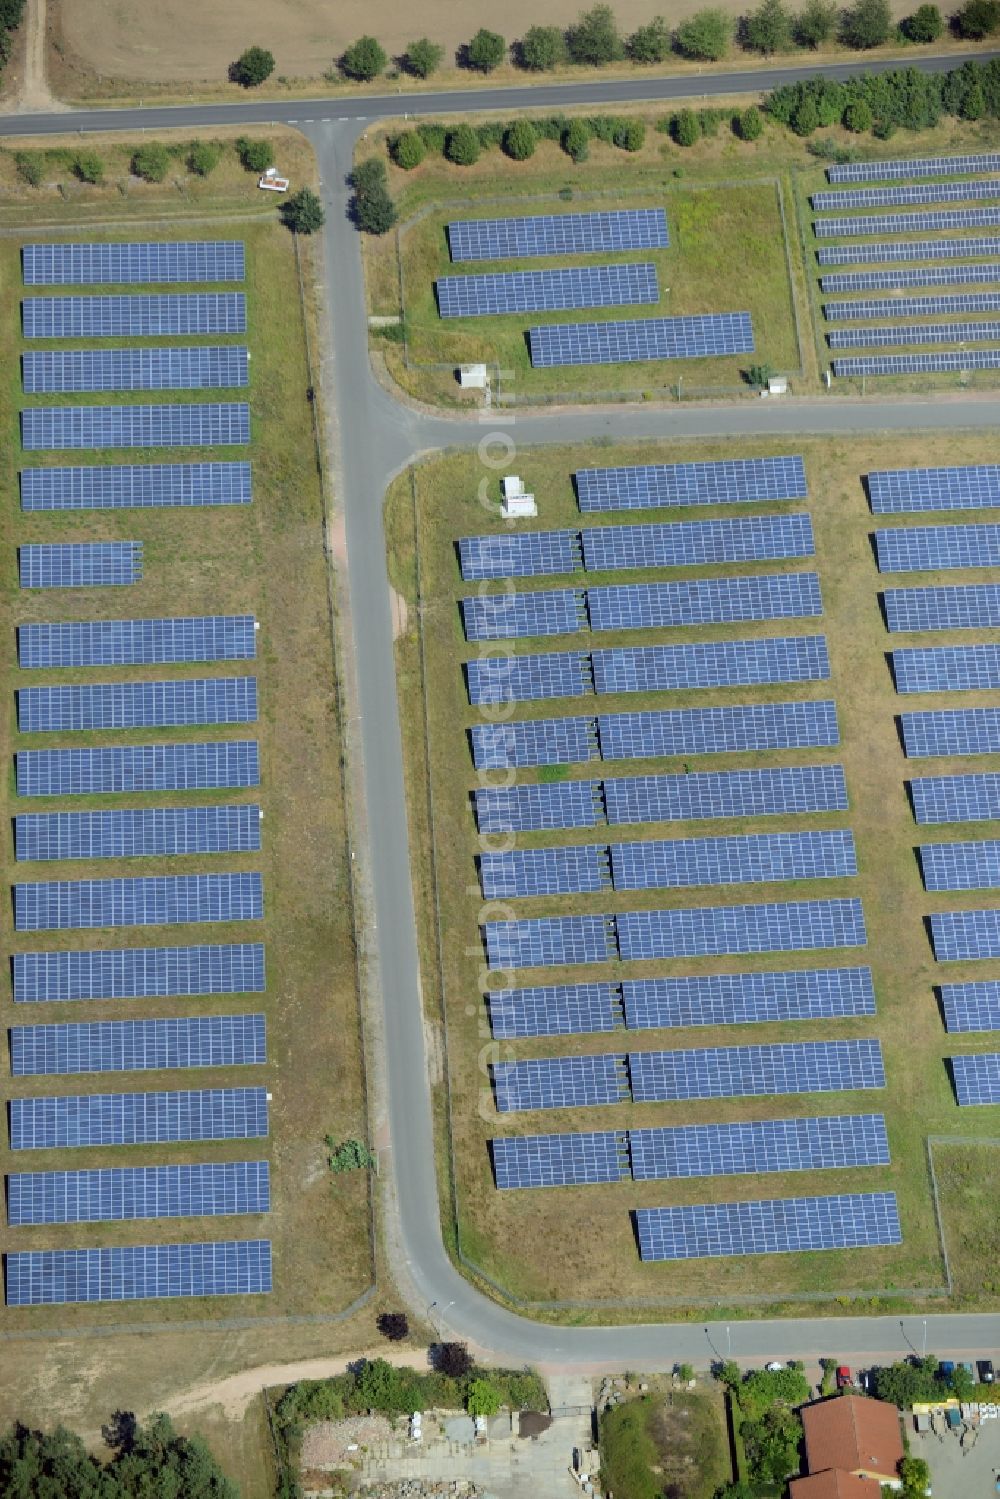 Aerial image Rietz-Neuendorf - Photovoltaic and solar energy plant Solarpark Alt-Golm in Rietz-Neuendorf in the state Brandenburg. The plant with its solar cells is located in the commercial area of Alt-Golm in the North of the borough of Rietz-Neuendorf in the county district of Oder-Spree